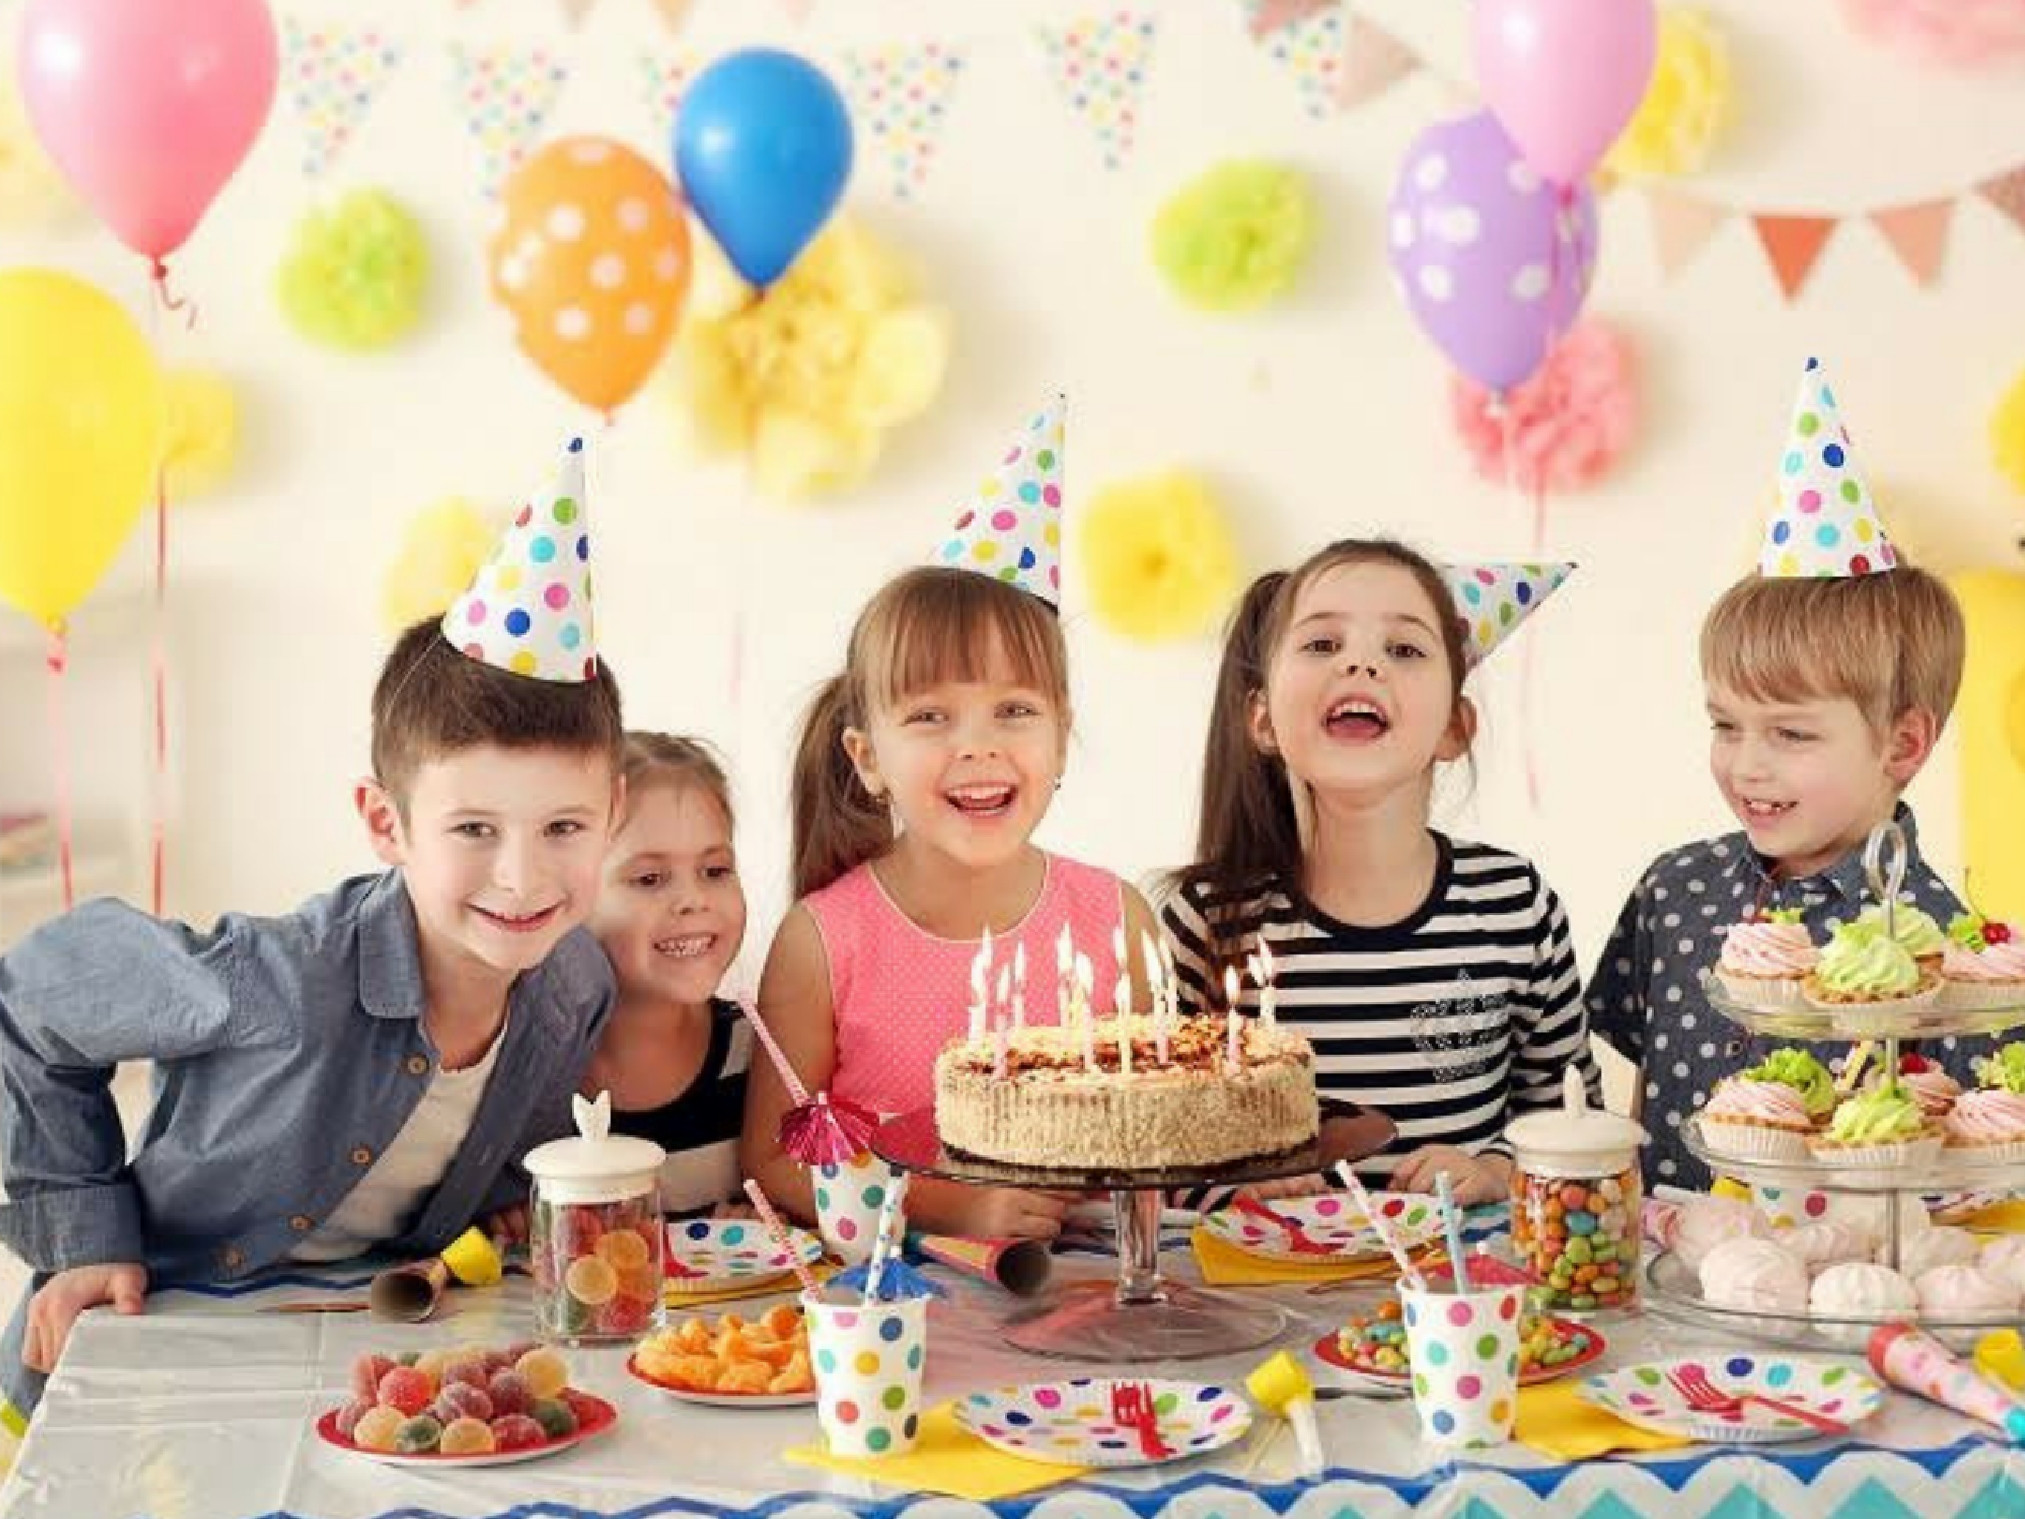 Good Birthday Gifts For Kids
 How to Throw a Memorable Birthday Party for Your Kid